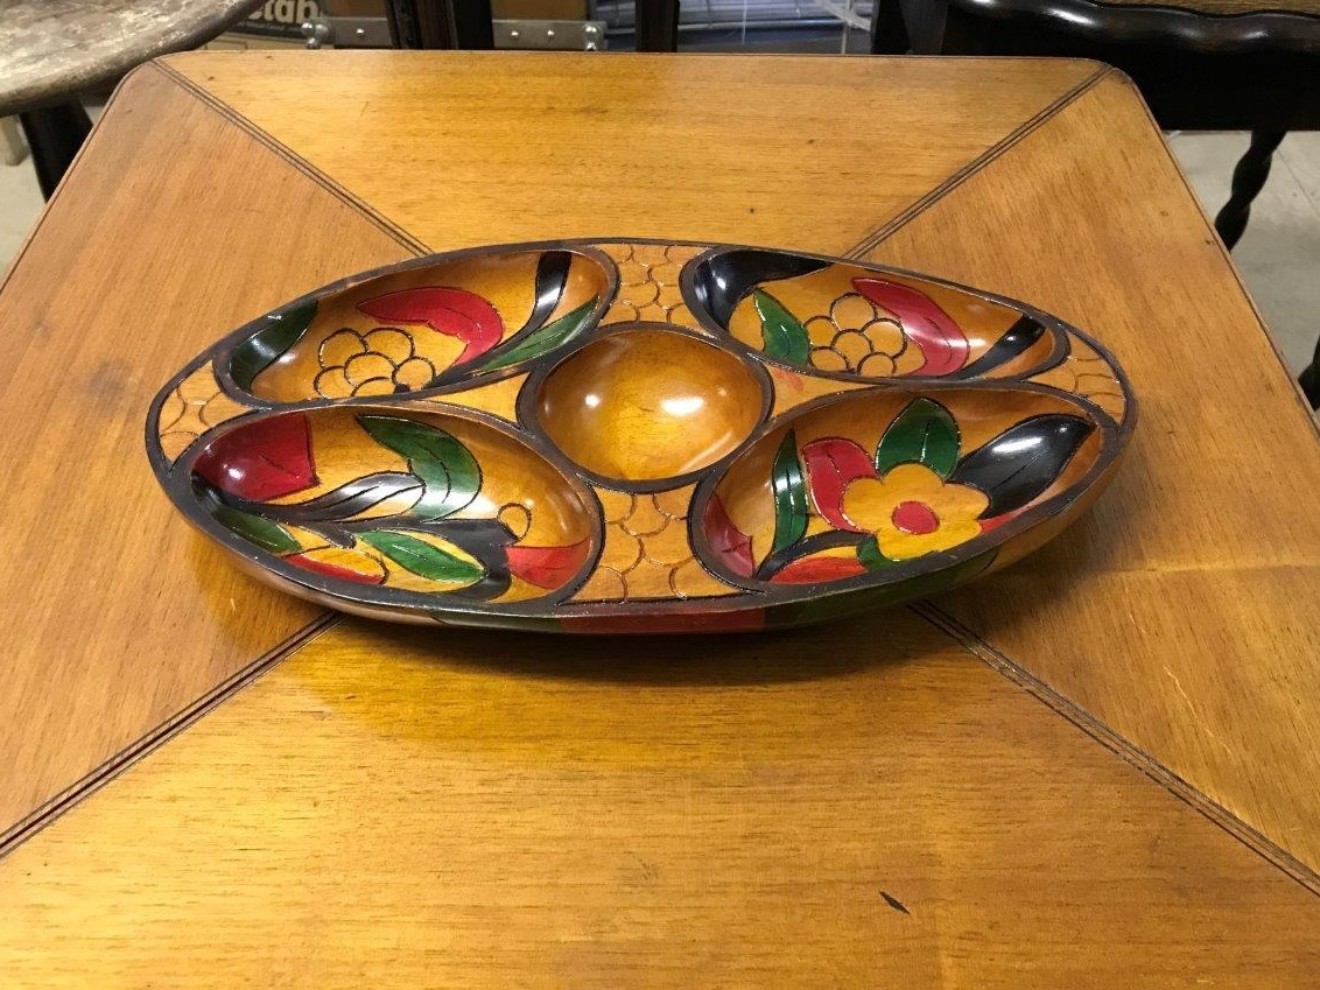 Wooden Painted Hors D'oeuvres Serving Dish